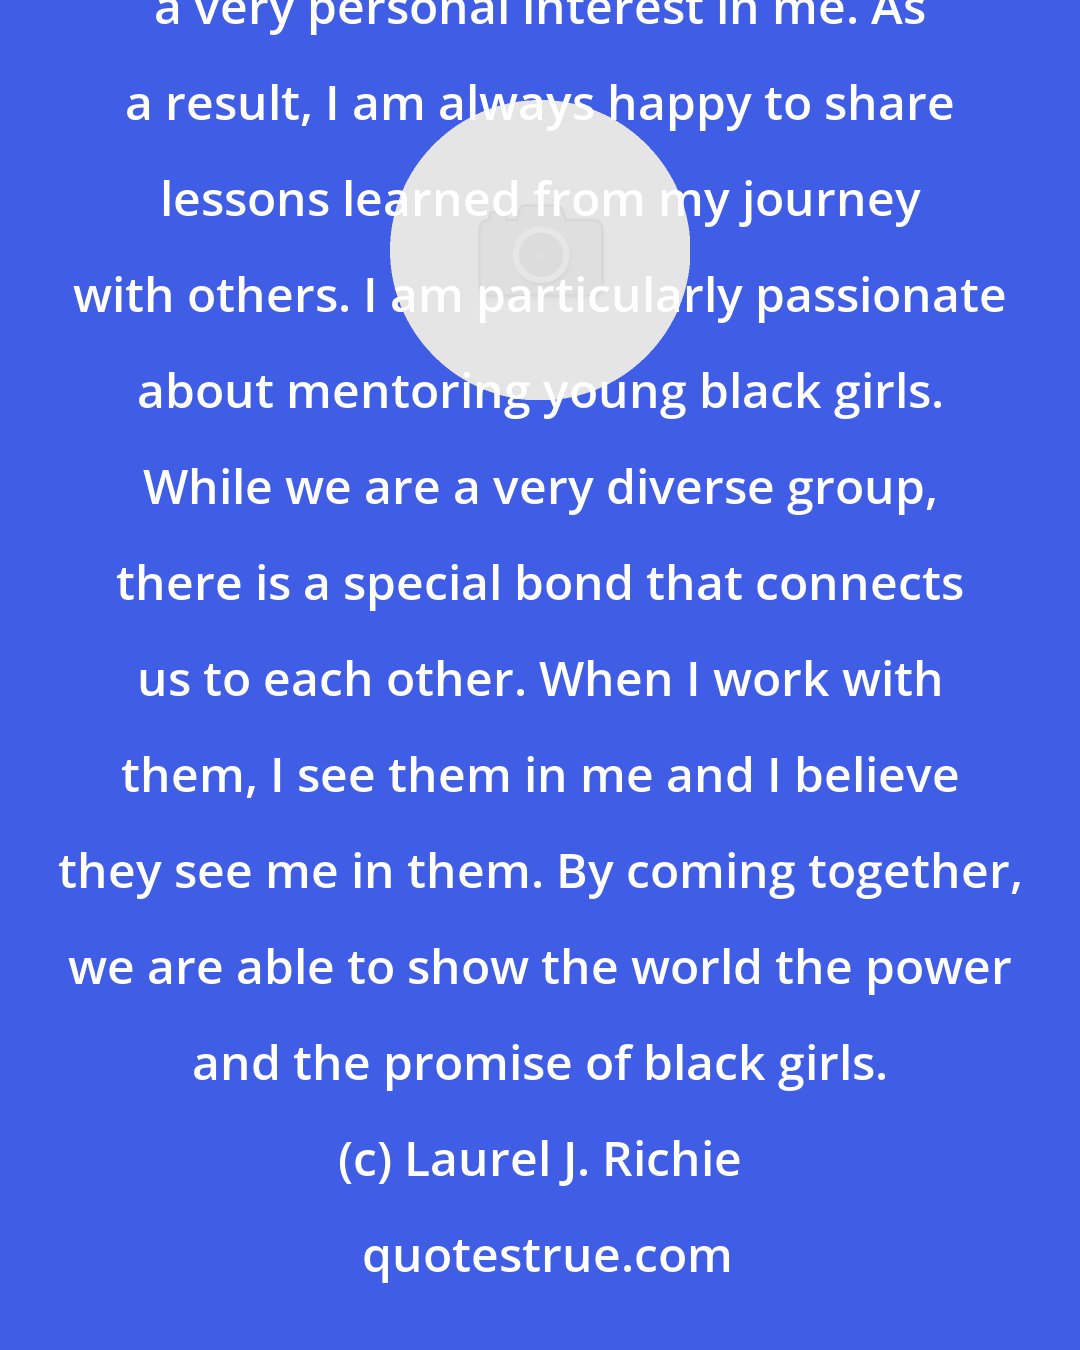 Laurel J. Richie: Throughout my career, I have benefitted from the experience and counsel of a wide range of people who took a very personal interest in me. As a result, I am always happy to share lessons learned from my journey with others. I am particularly passionate about mentoring young black girls. While we are a very diverse group, there is a special bond that connects us to each other. When I work with them, I see them in me and I believe they see me in them. By coming together, we are able to show the world the power and the promise of black girls.